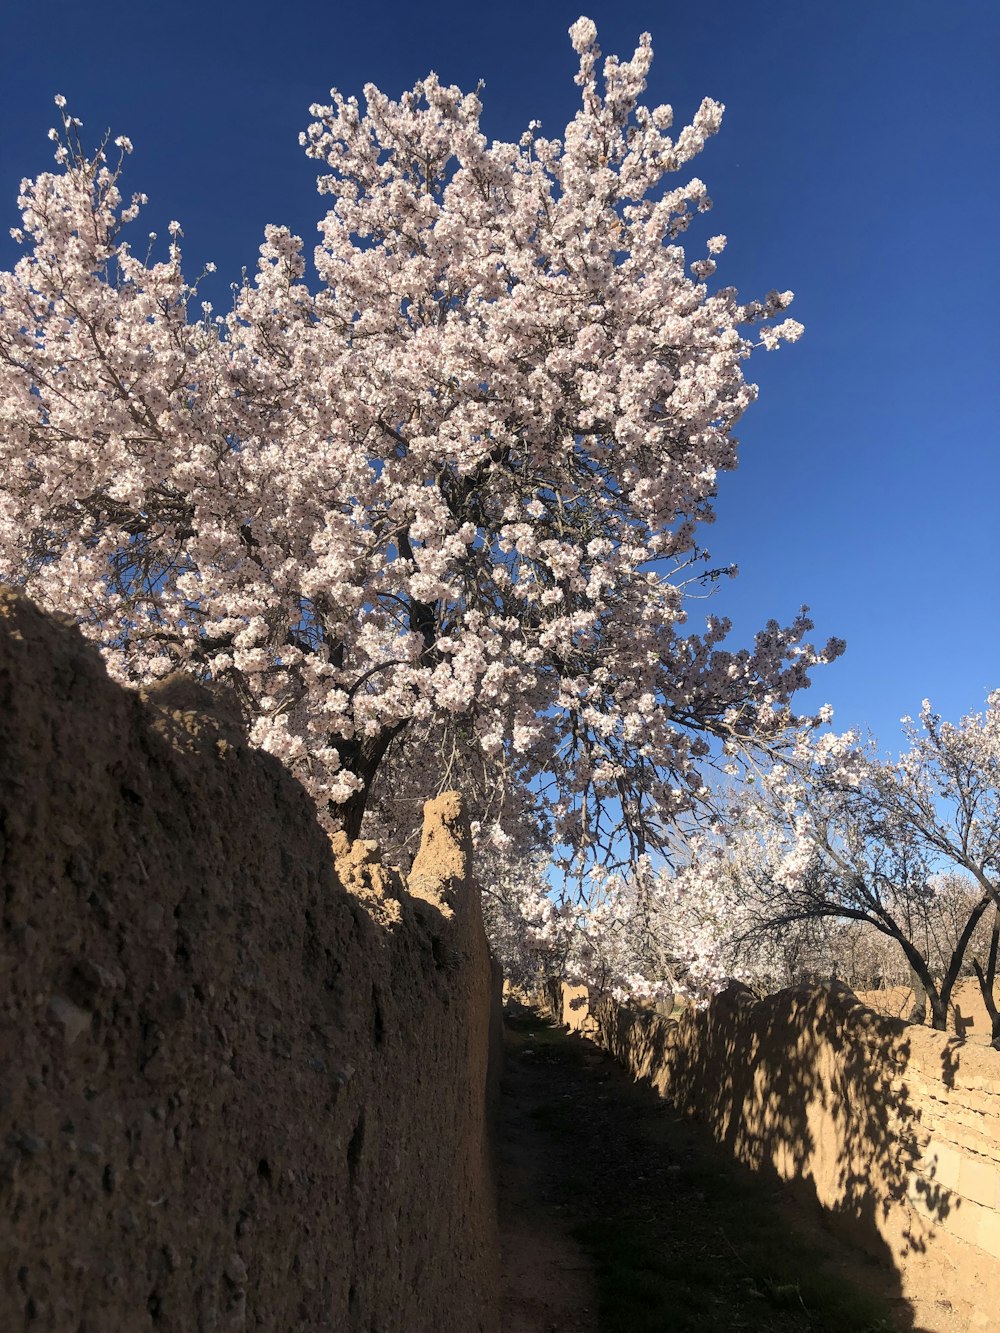 a tree in bloom next to a stone wall